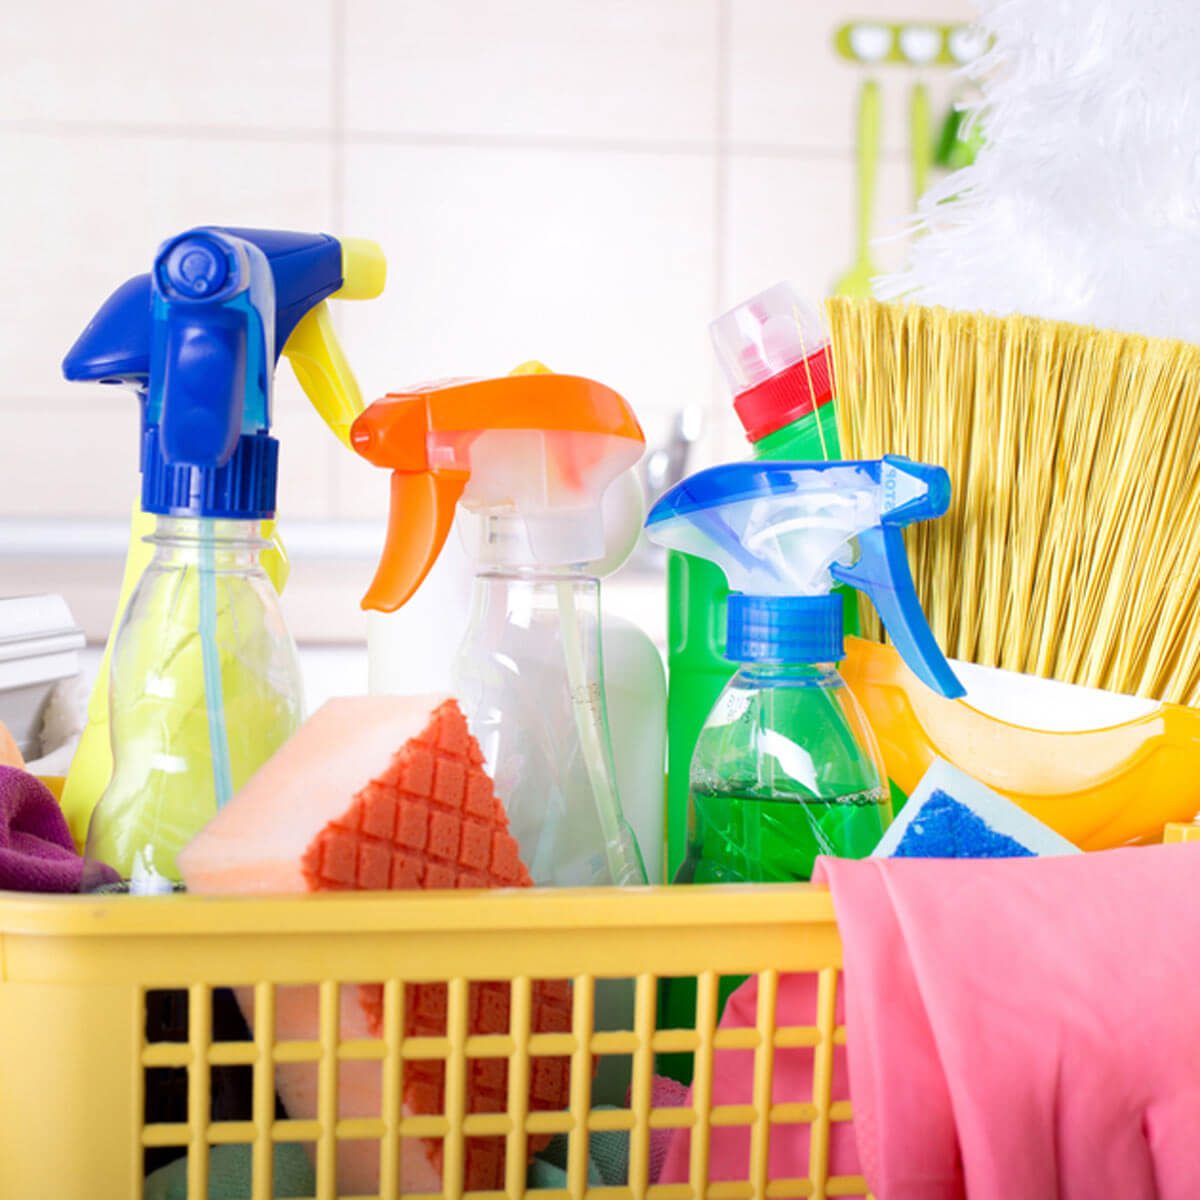 The Most Trusted Cleaning Products in America